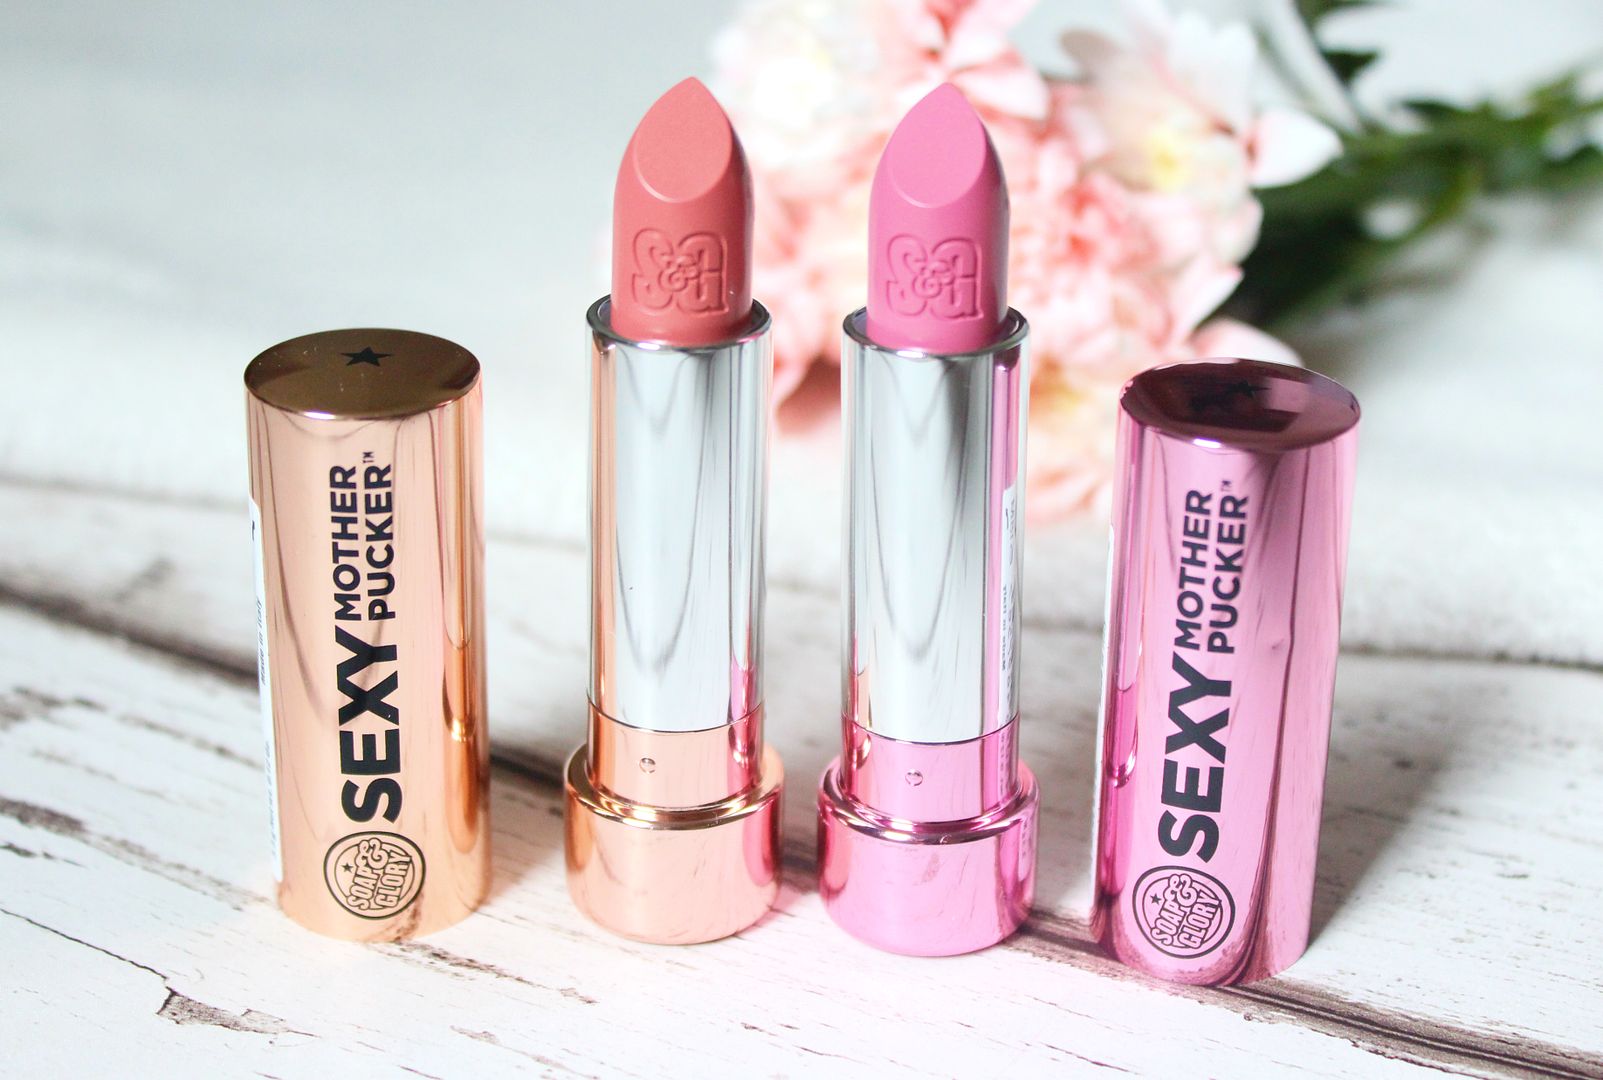 New Soap And Glory Sexy Mother Pucker Lipsticks Nude Pink Naked Talent Pink Up Girl Review Packaging Belle-Amie UK Beauty Fashion Lifestyle Blog